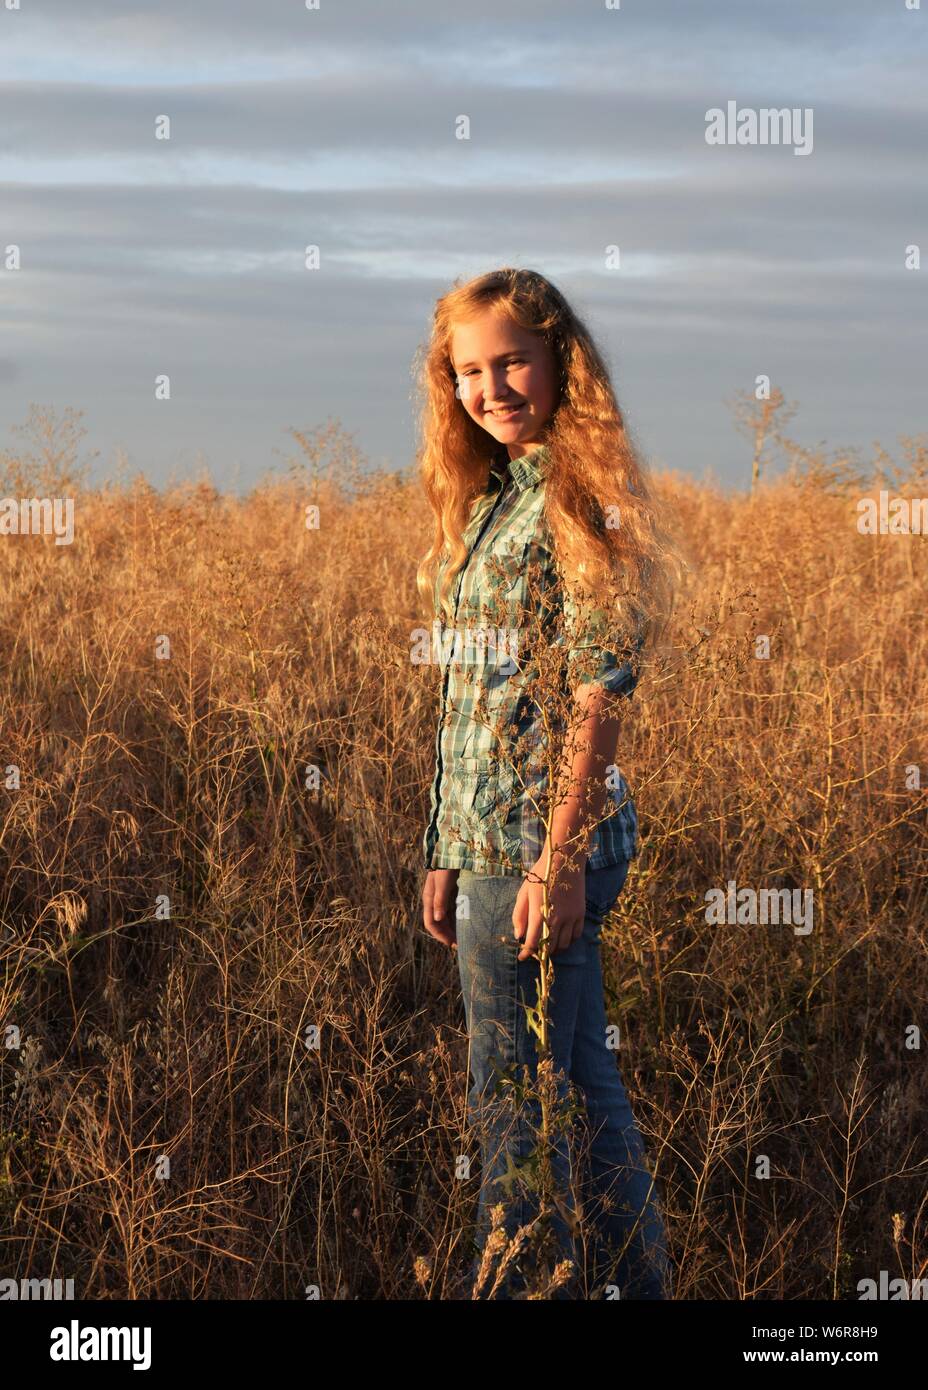 Girl with gold hair in field during sunset Stock Photo